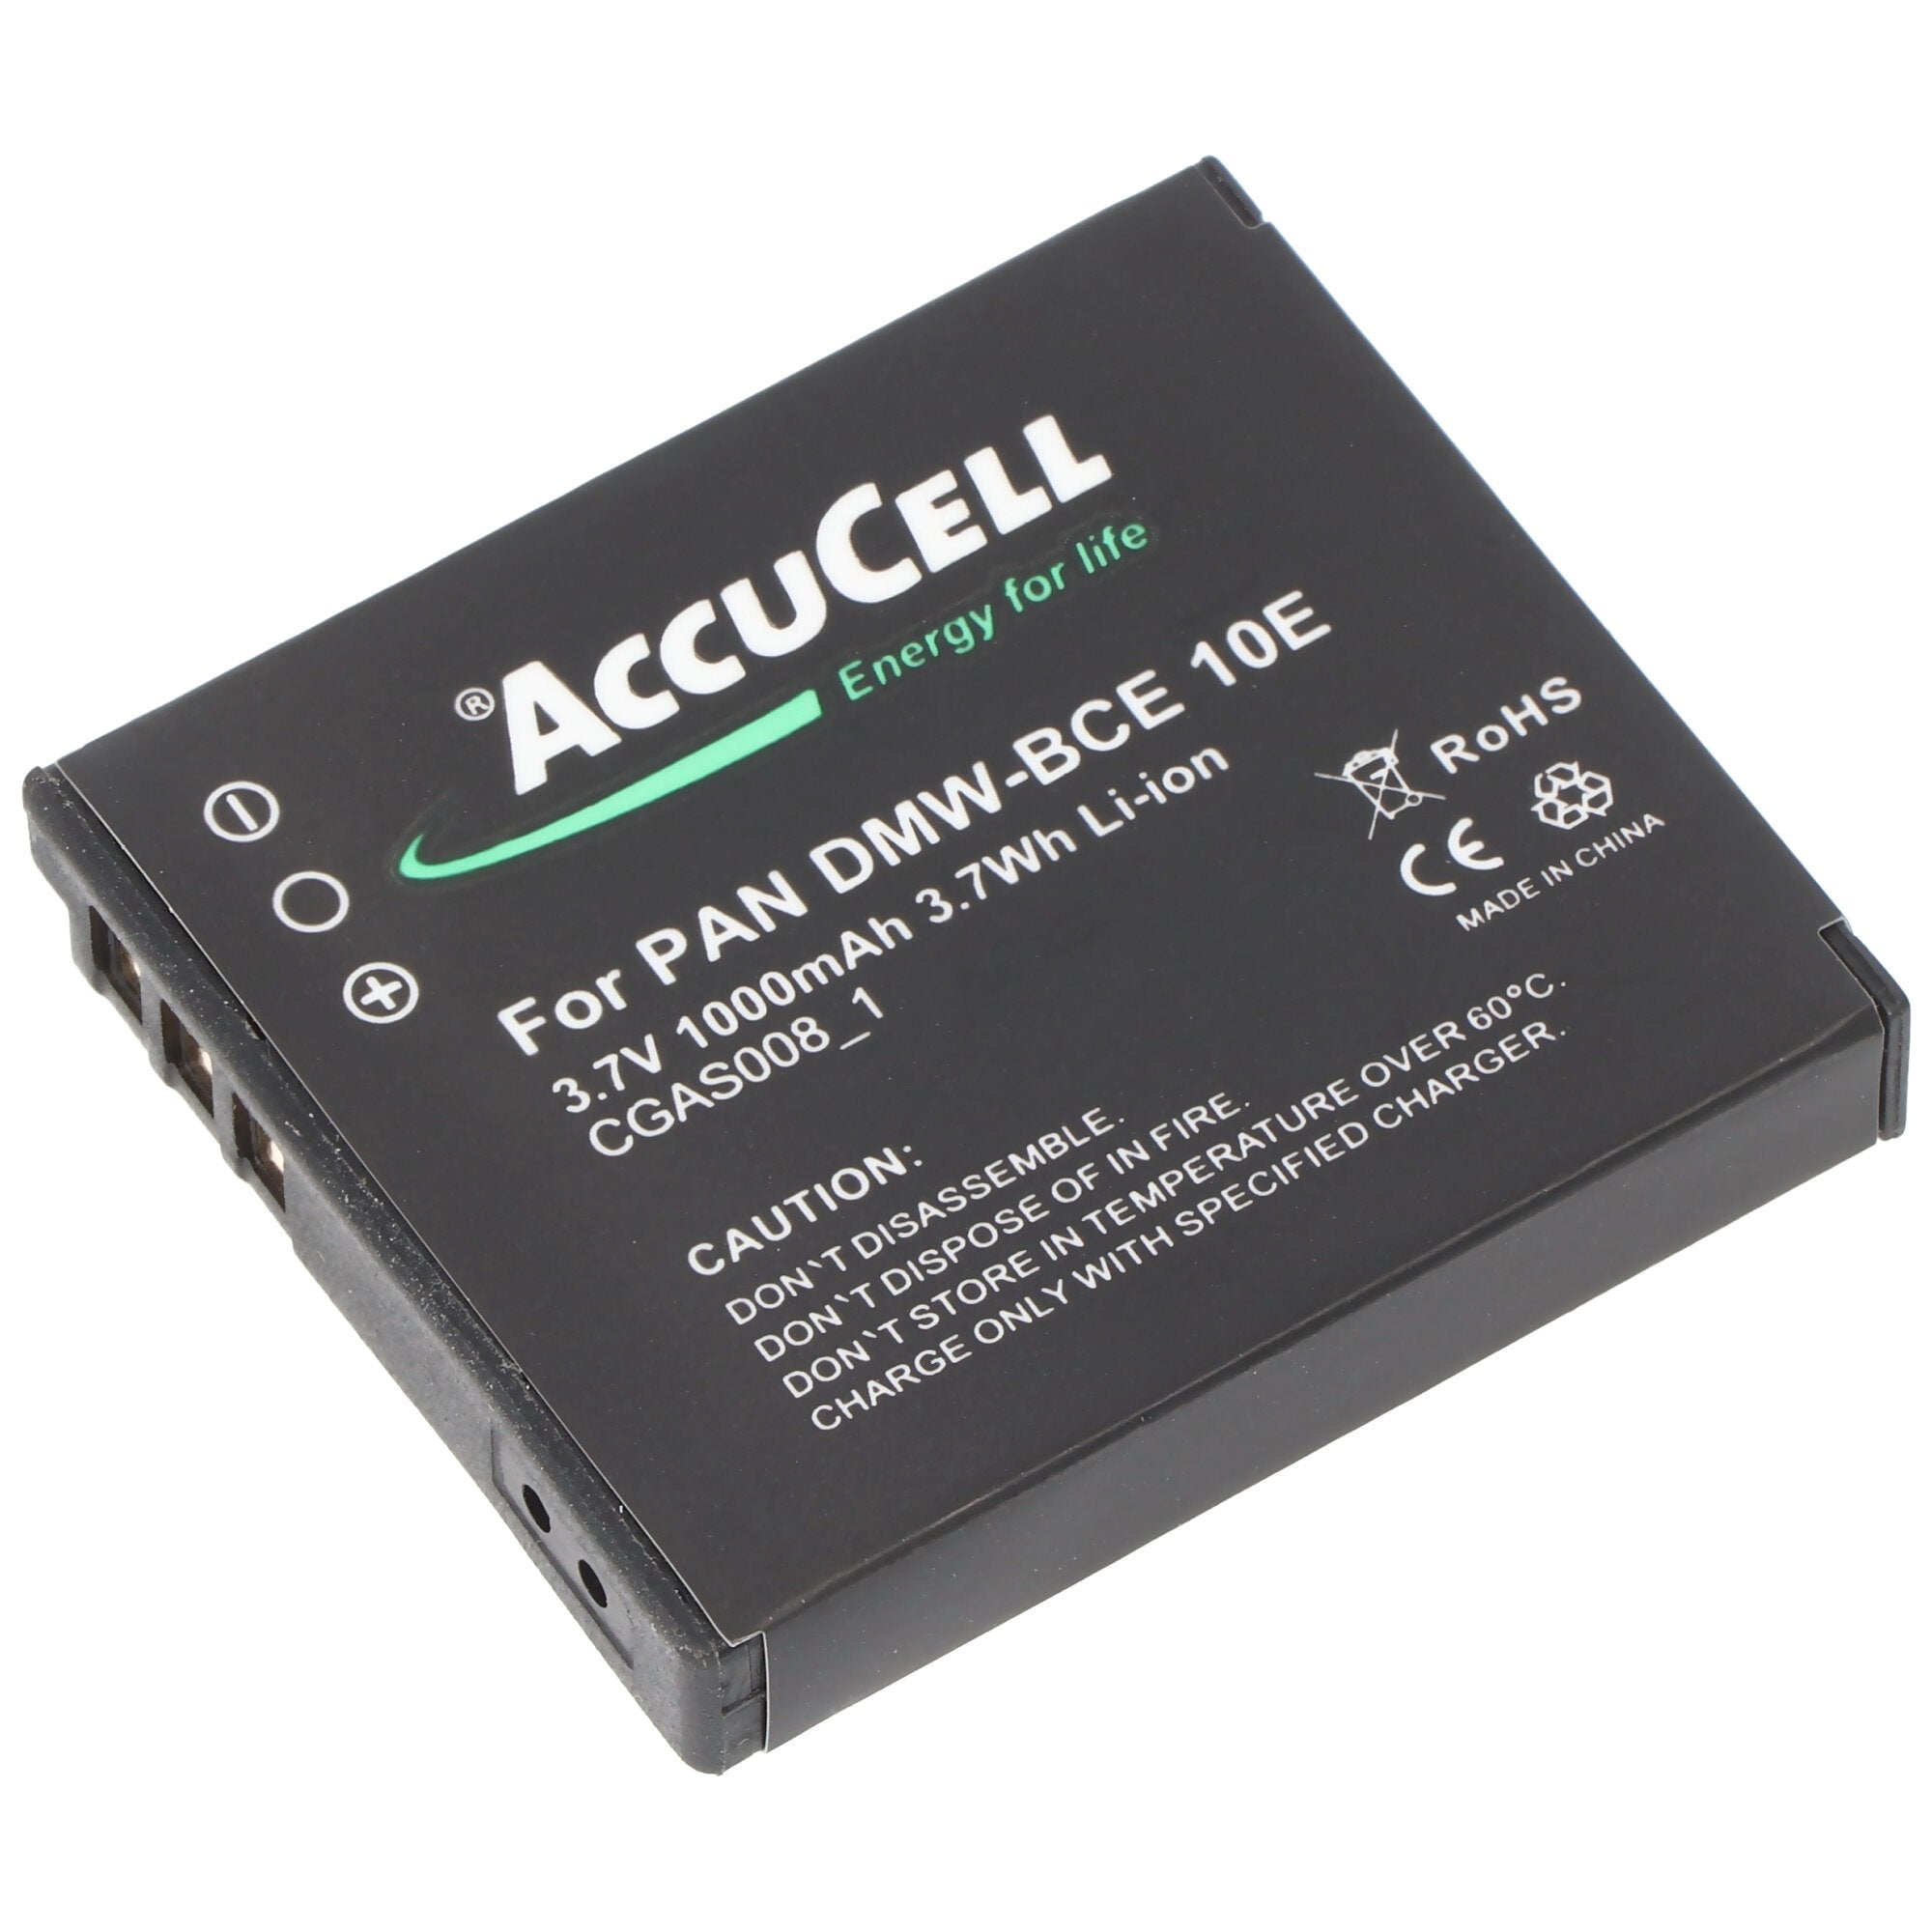 AccuCell battery suitable for Panasonic VW-VBJ10, SDR-S10, CGA-S008